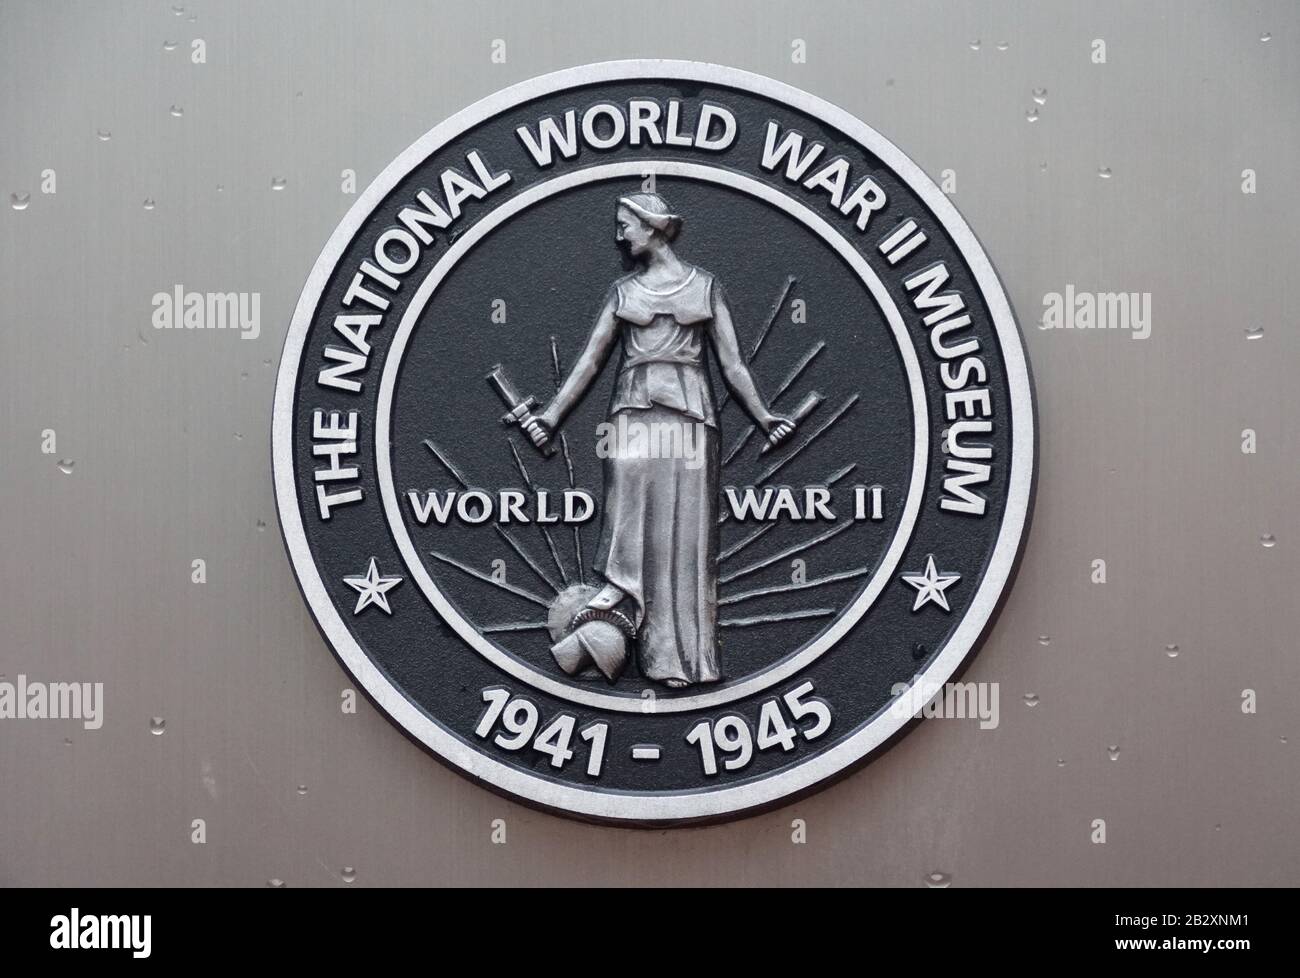 New Orleans, Louisiana, U.S.A - February 4, 2020 - The official sign at The National World War II Museum entrance Stock Photo